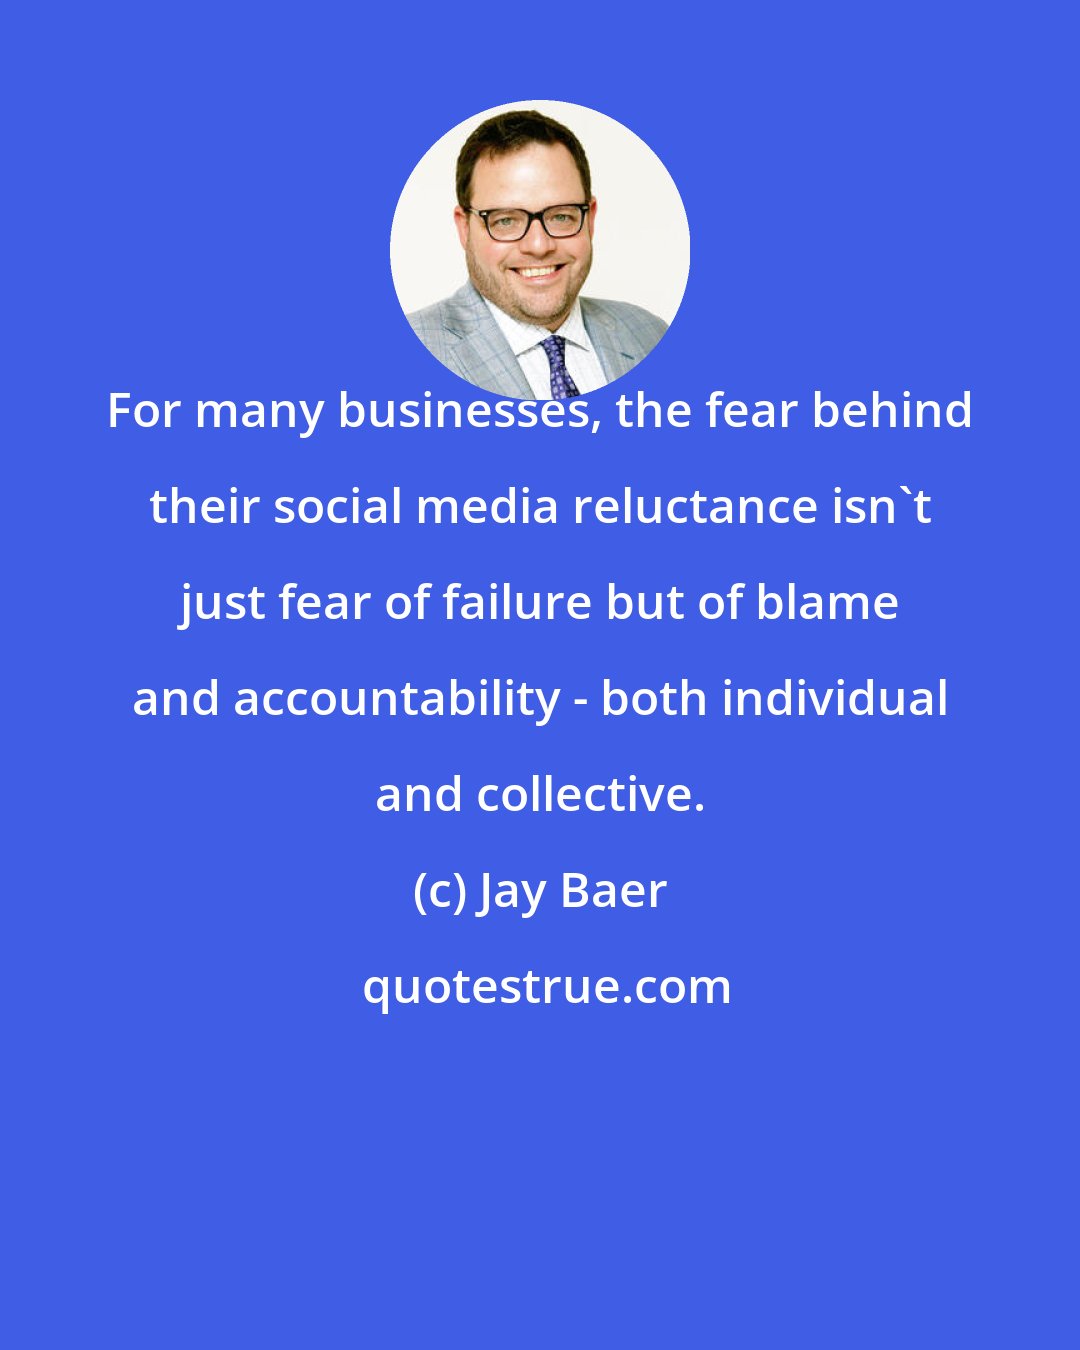 Jay Baer: For many businesses, the fear behind their social media reluctance isn't just fear of failure but of blame and accountability - both individual and collective.